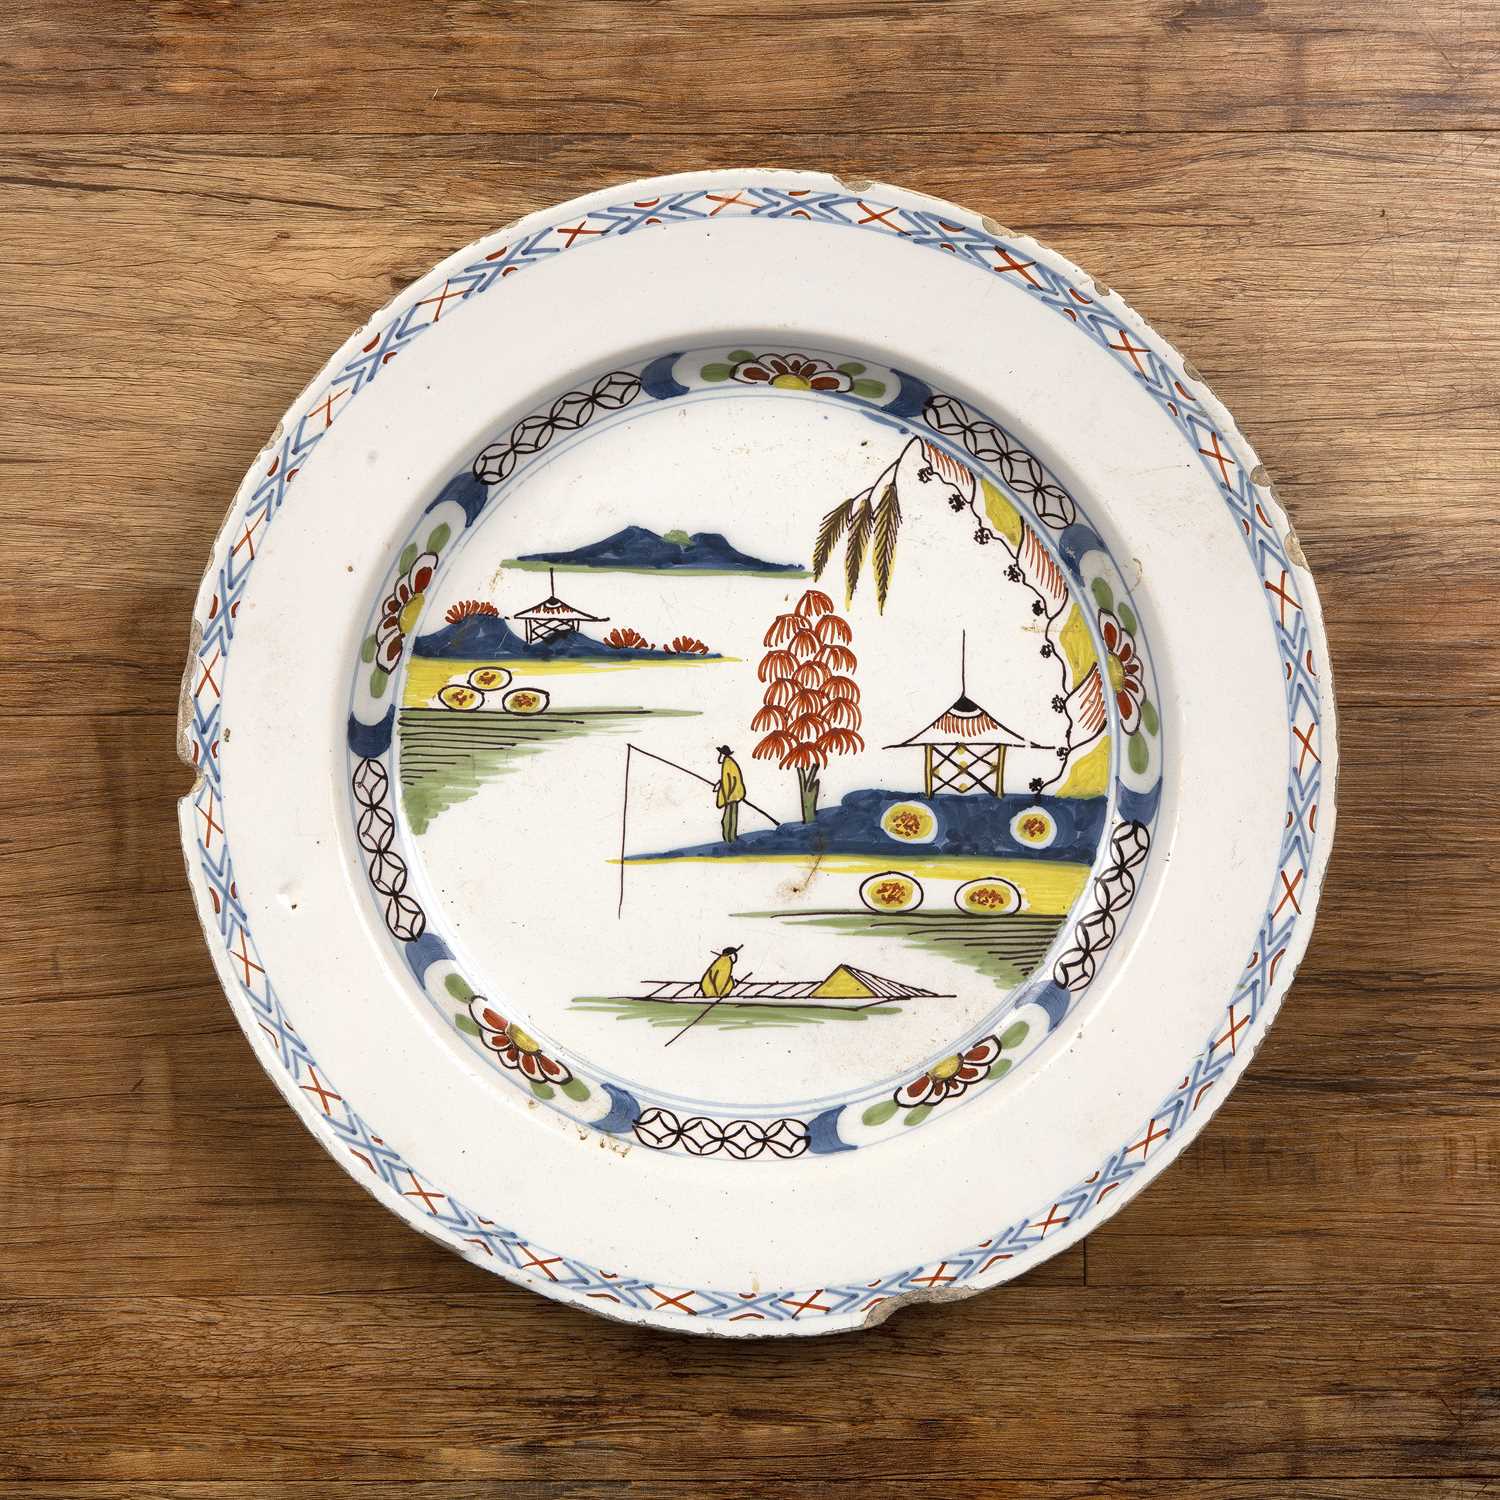 Polychrome Delftware charger English, circa 1780, painted with a Chinese landscape and fishermen,